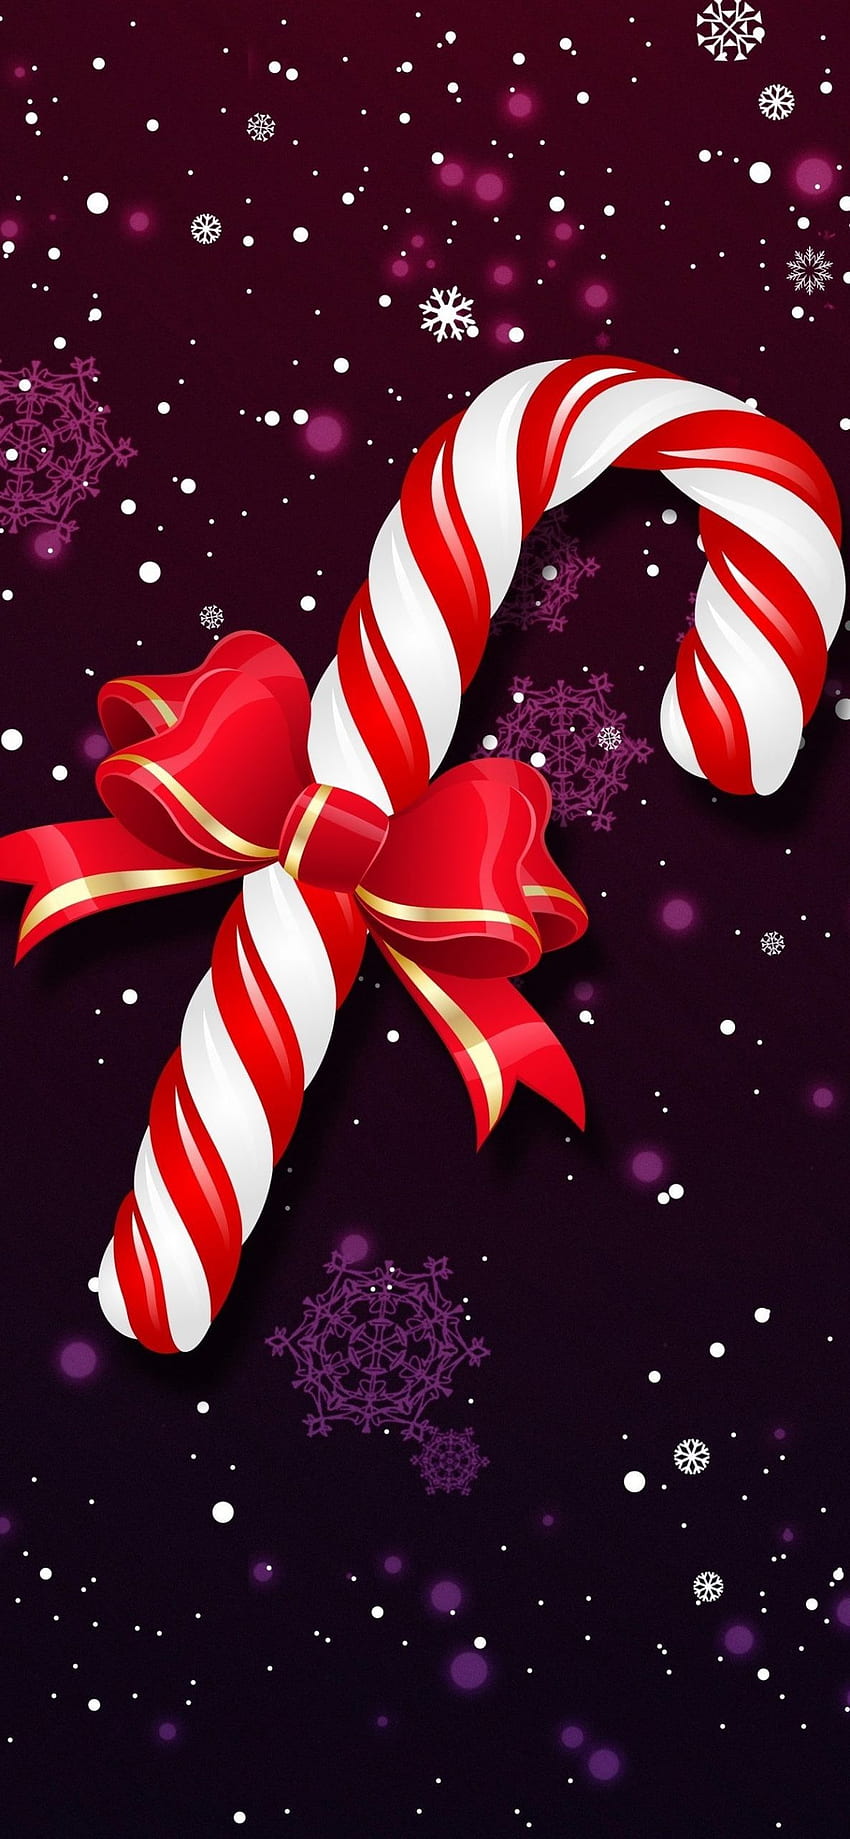 Candy Cane Wallpapers on WallpaperDog